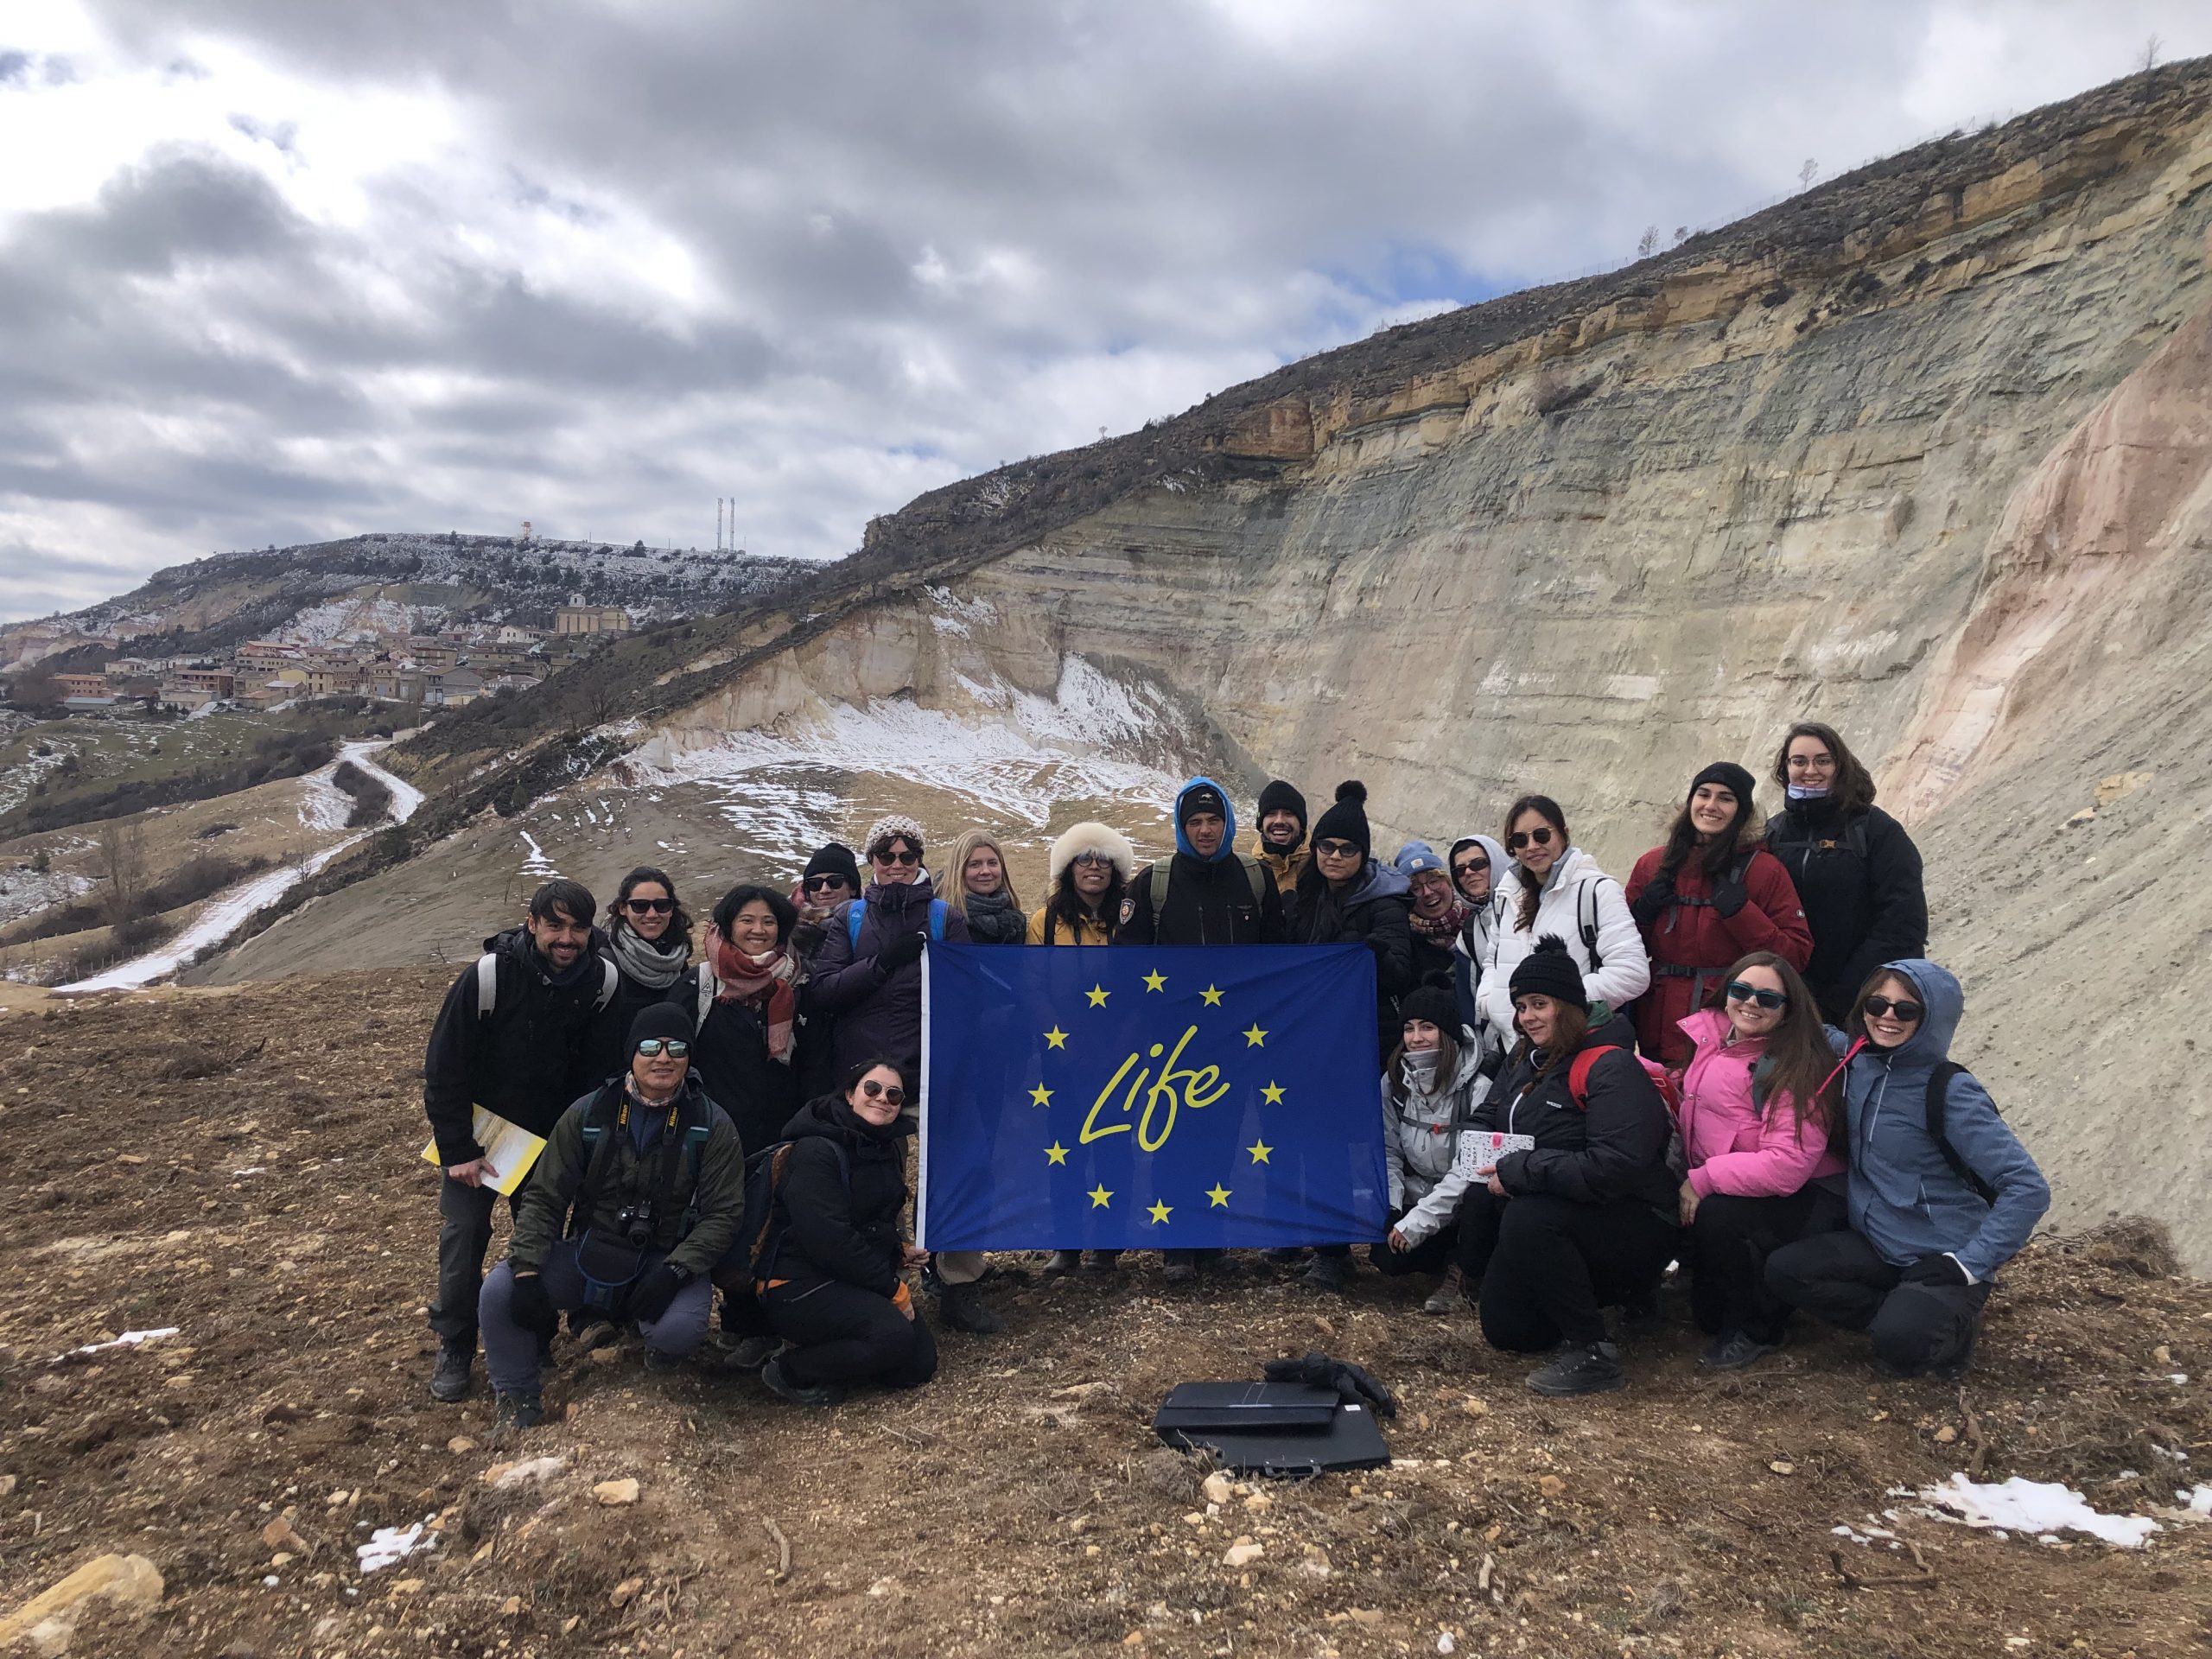 Excursion to the Santa Engracia mine by students of the Master in Environmental Geology